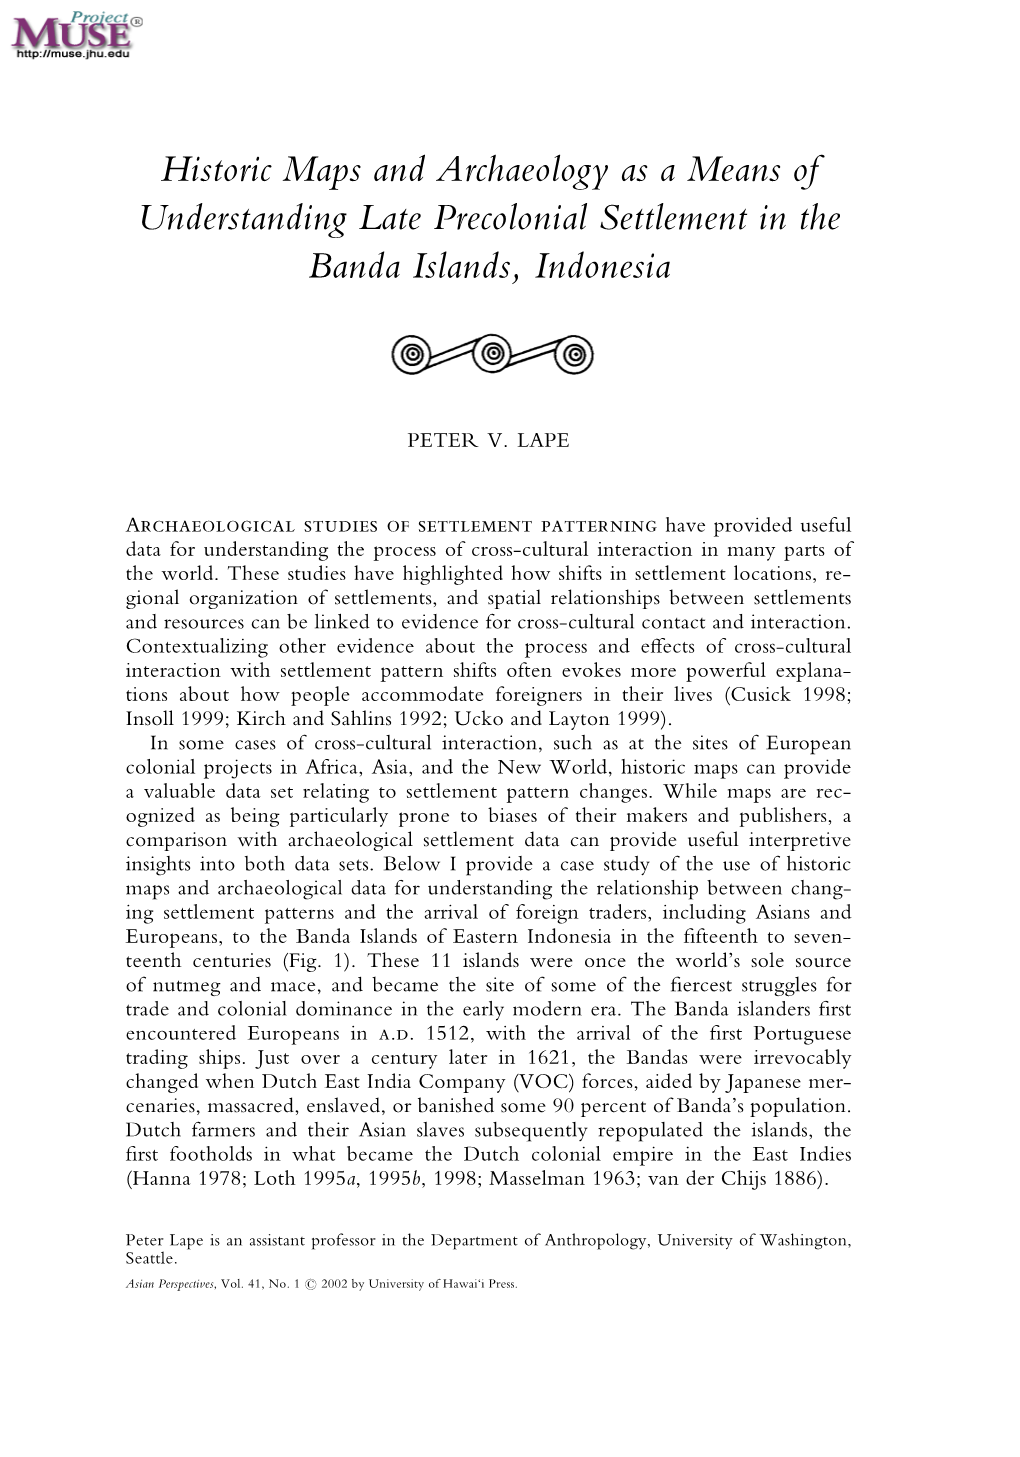 Historic Maps and Archaeology As a Means of Understanding Late Precolonial Settlement in the Banda Islands, Indonesia